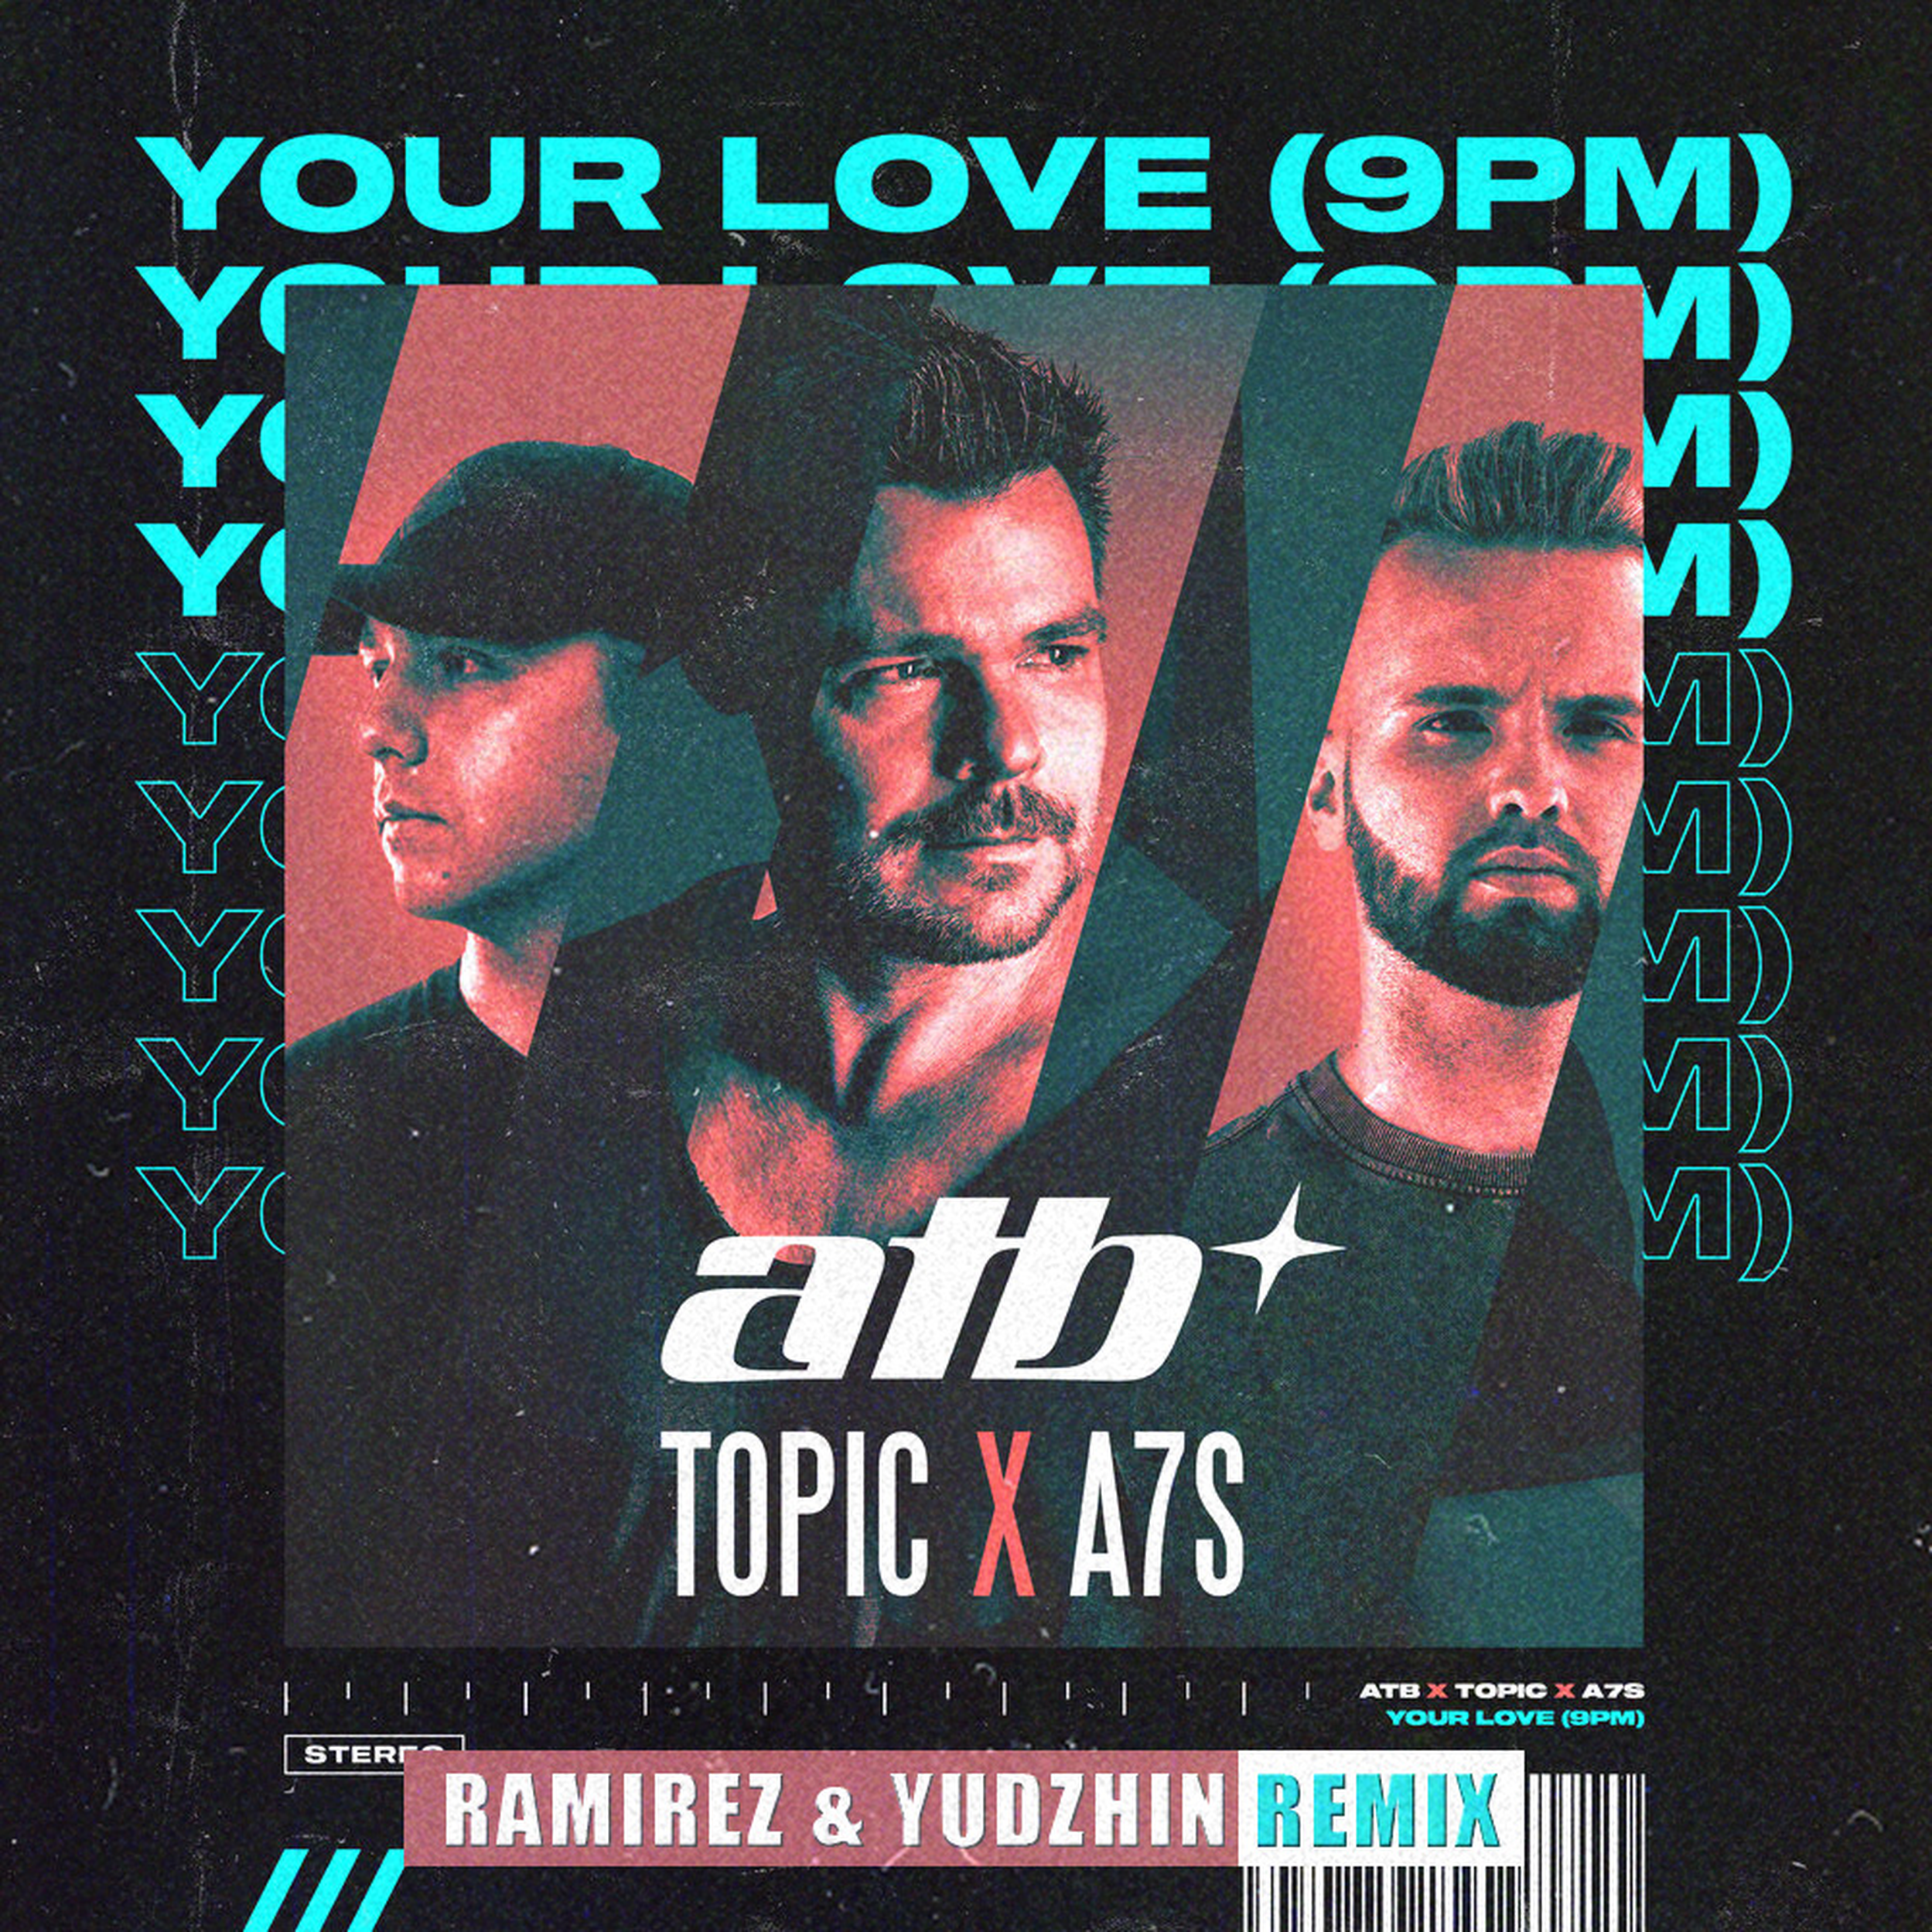 Atb topic a7s. ATB, topic, a7s - your Love (9pm). ATB topic a7s your Love.